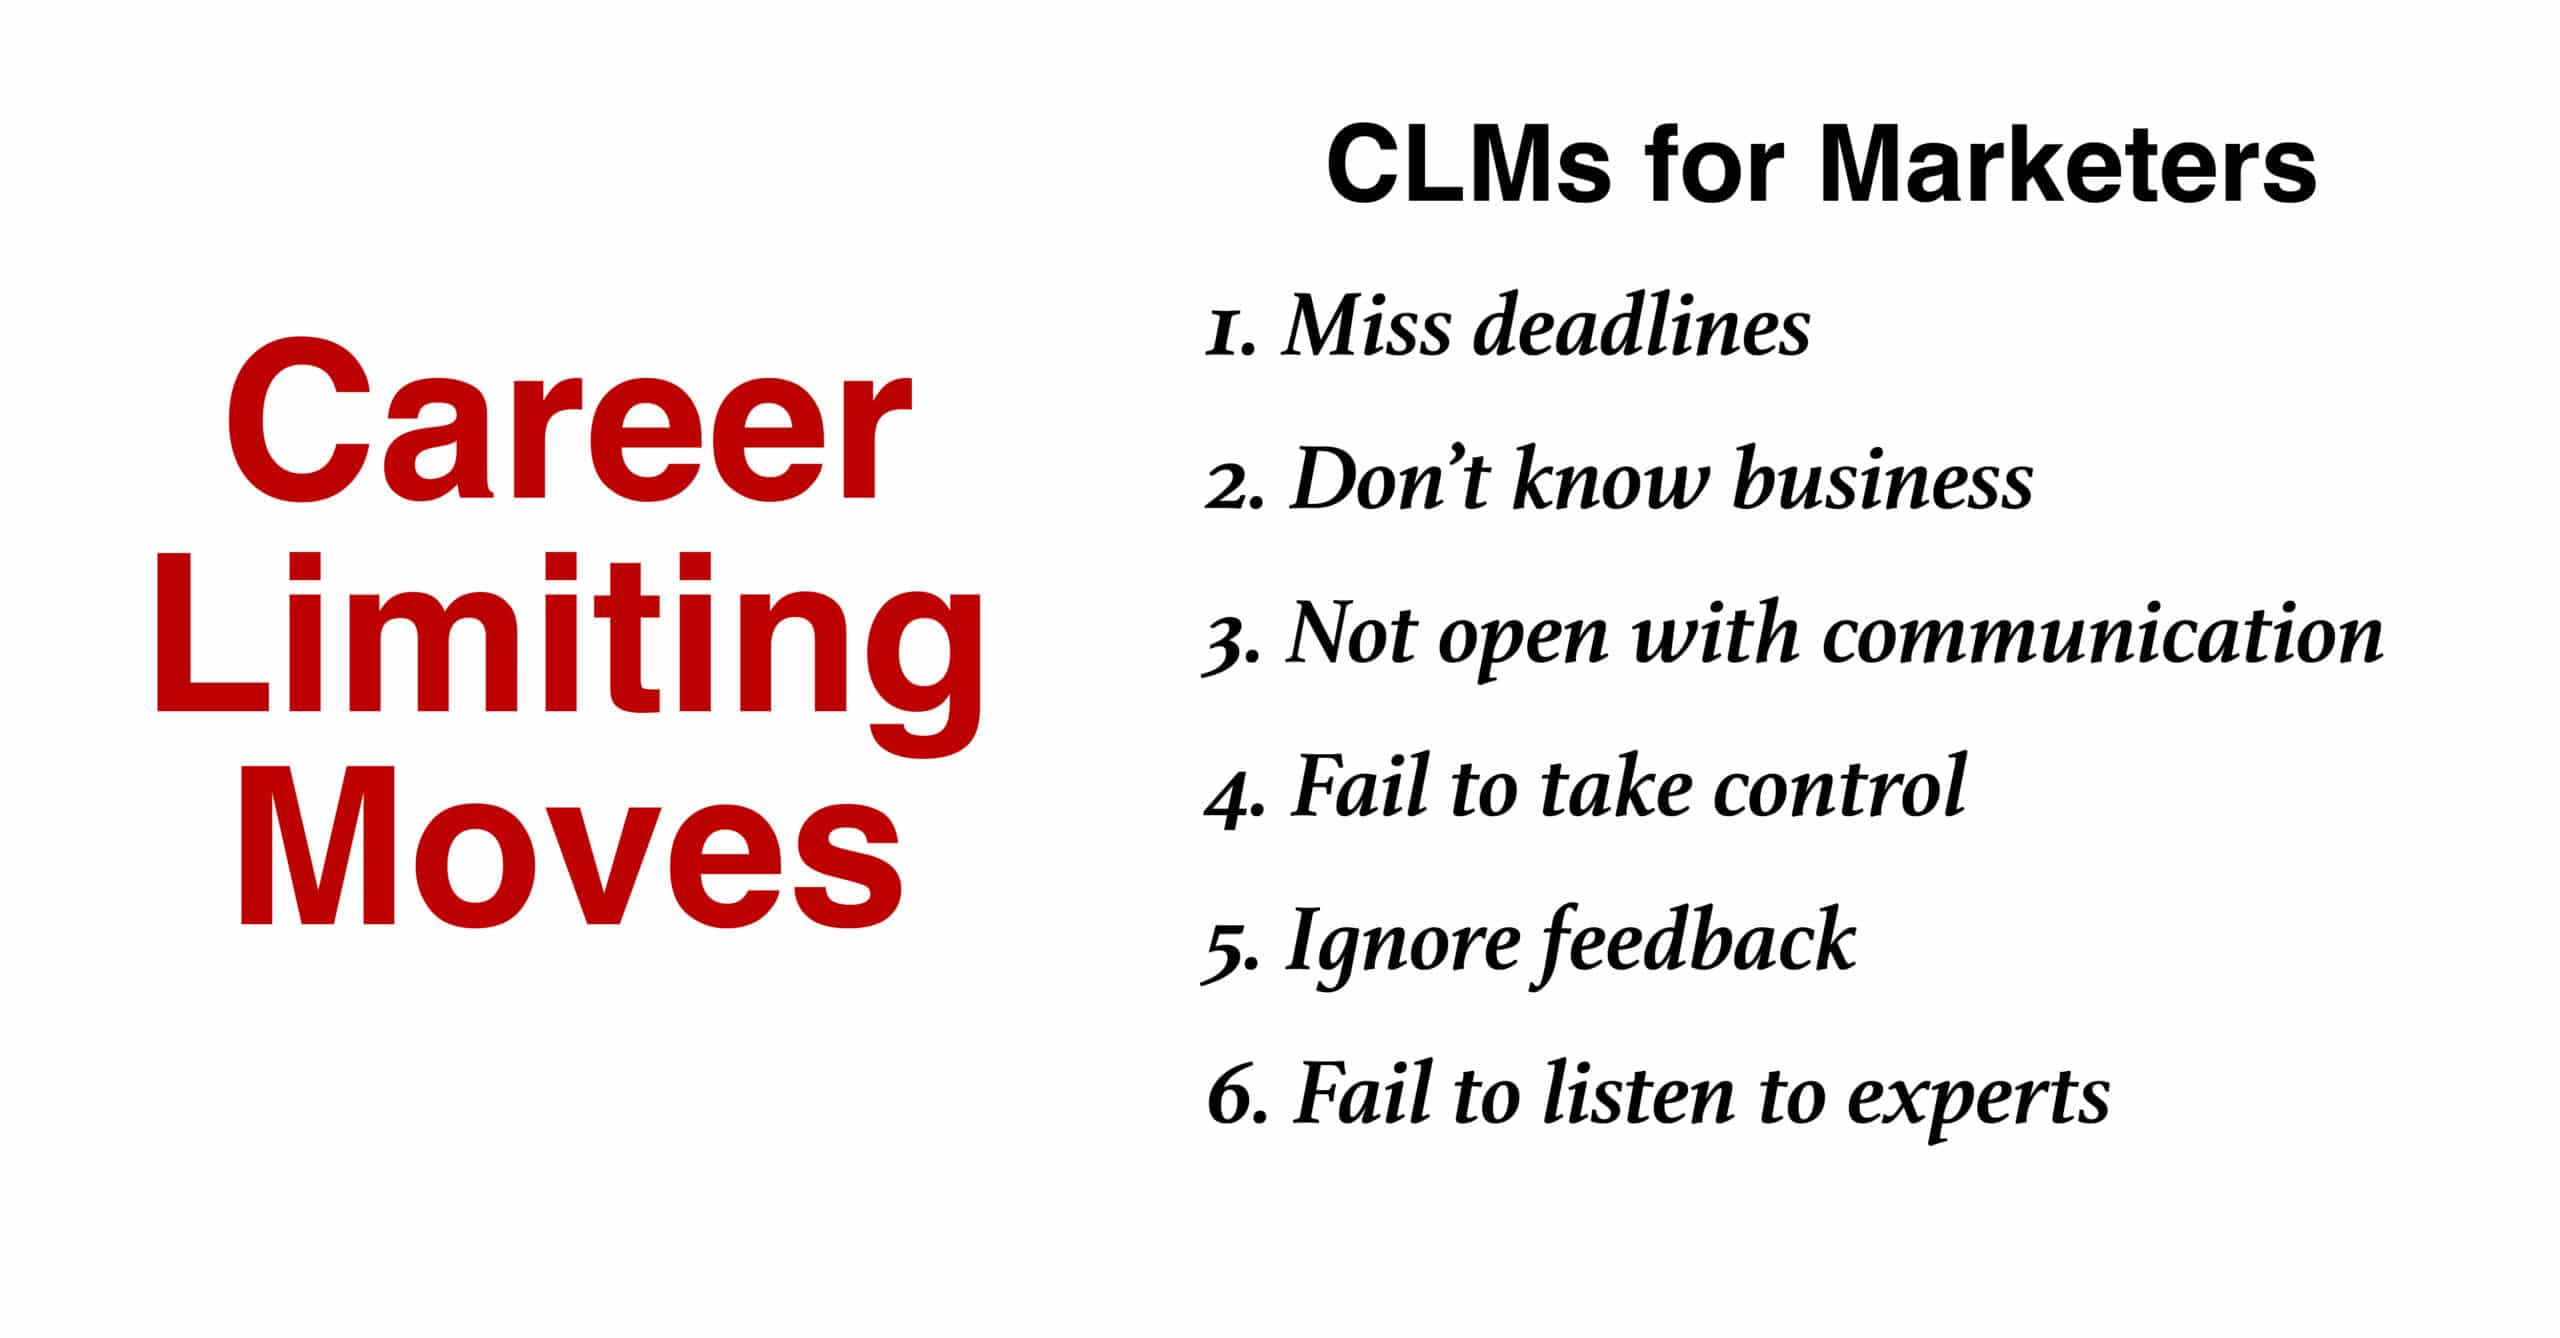 CLMs for Marketers in your marketing career